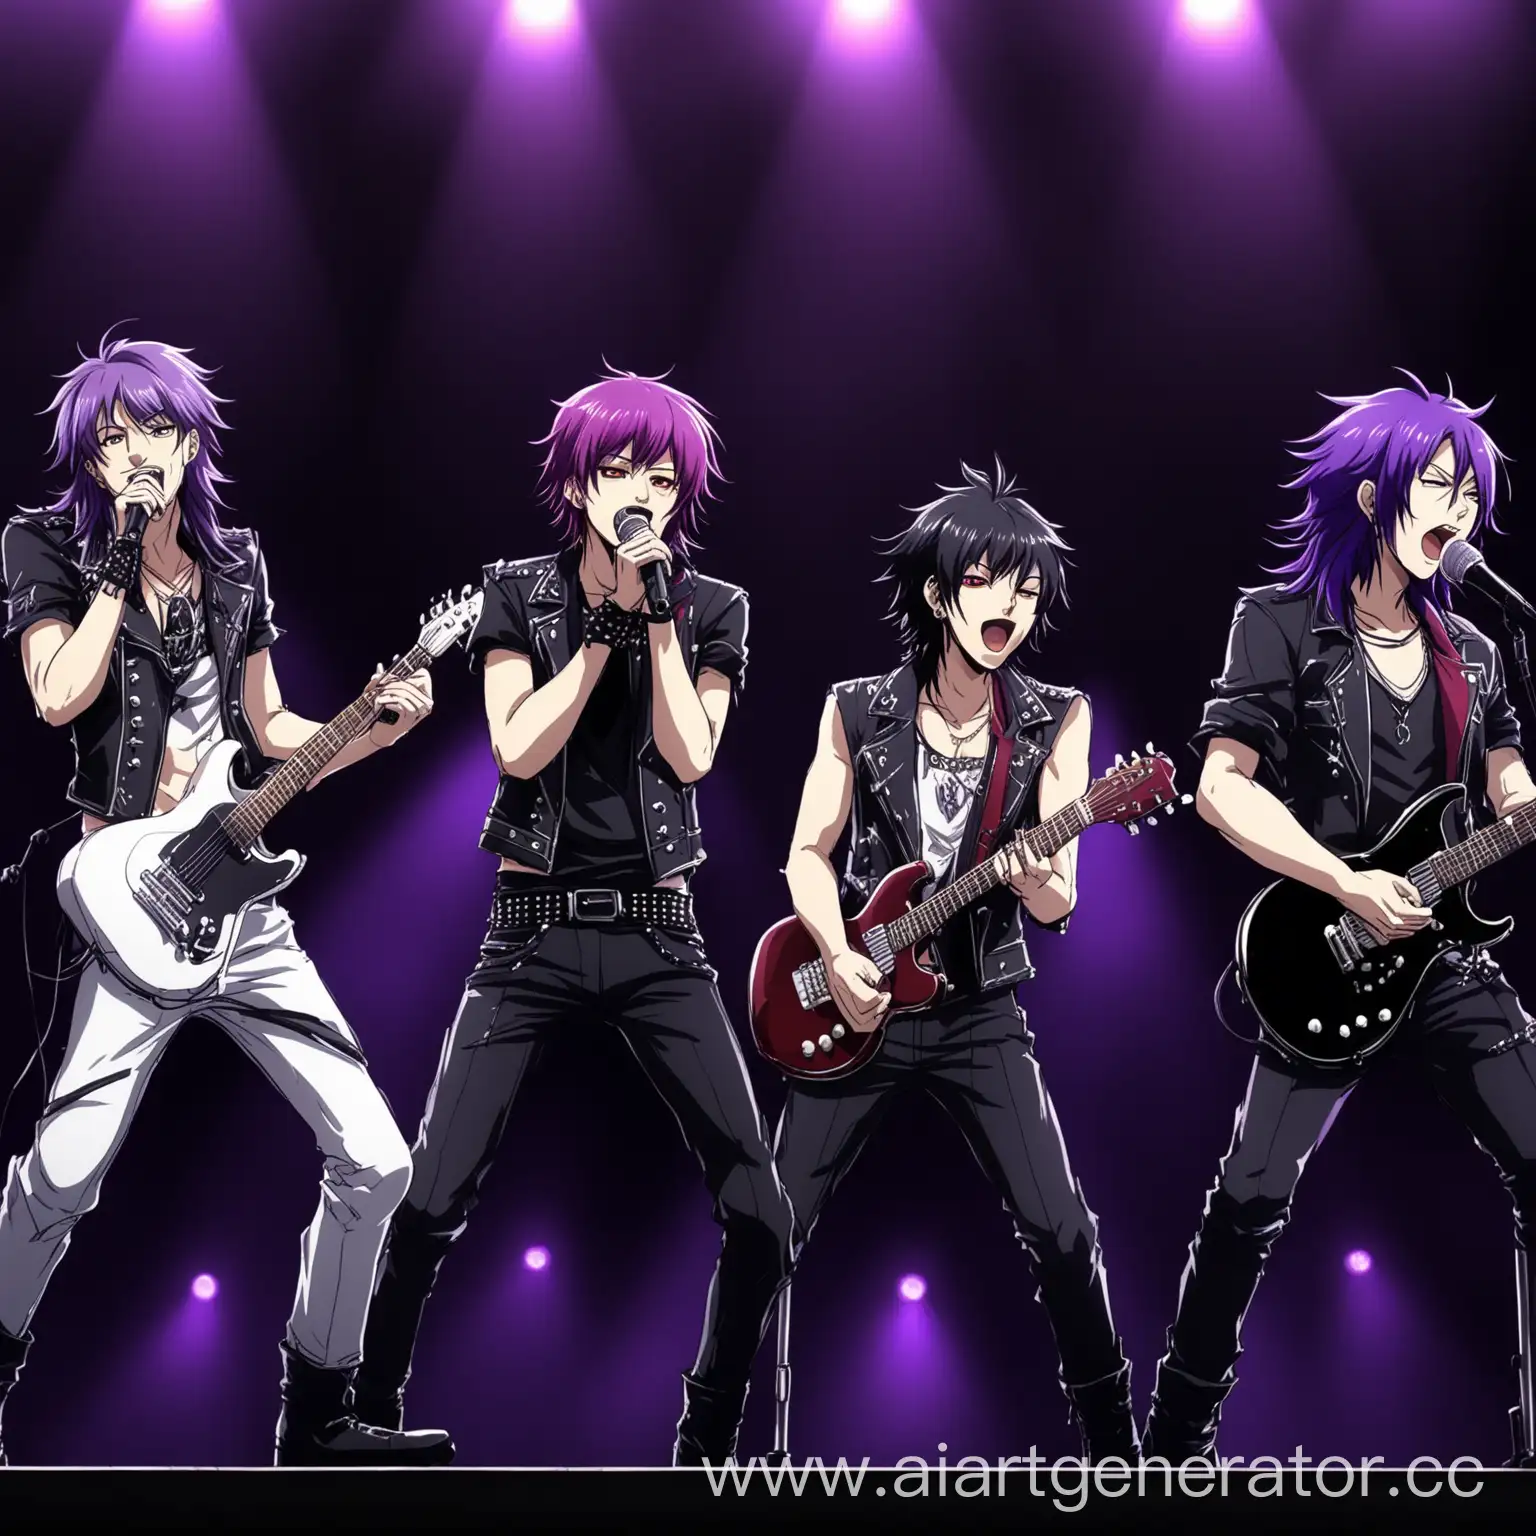 Animestyle-Rocker-Guys-with-Black-and-Purple-Hair-Performing-Live-Concert